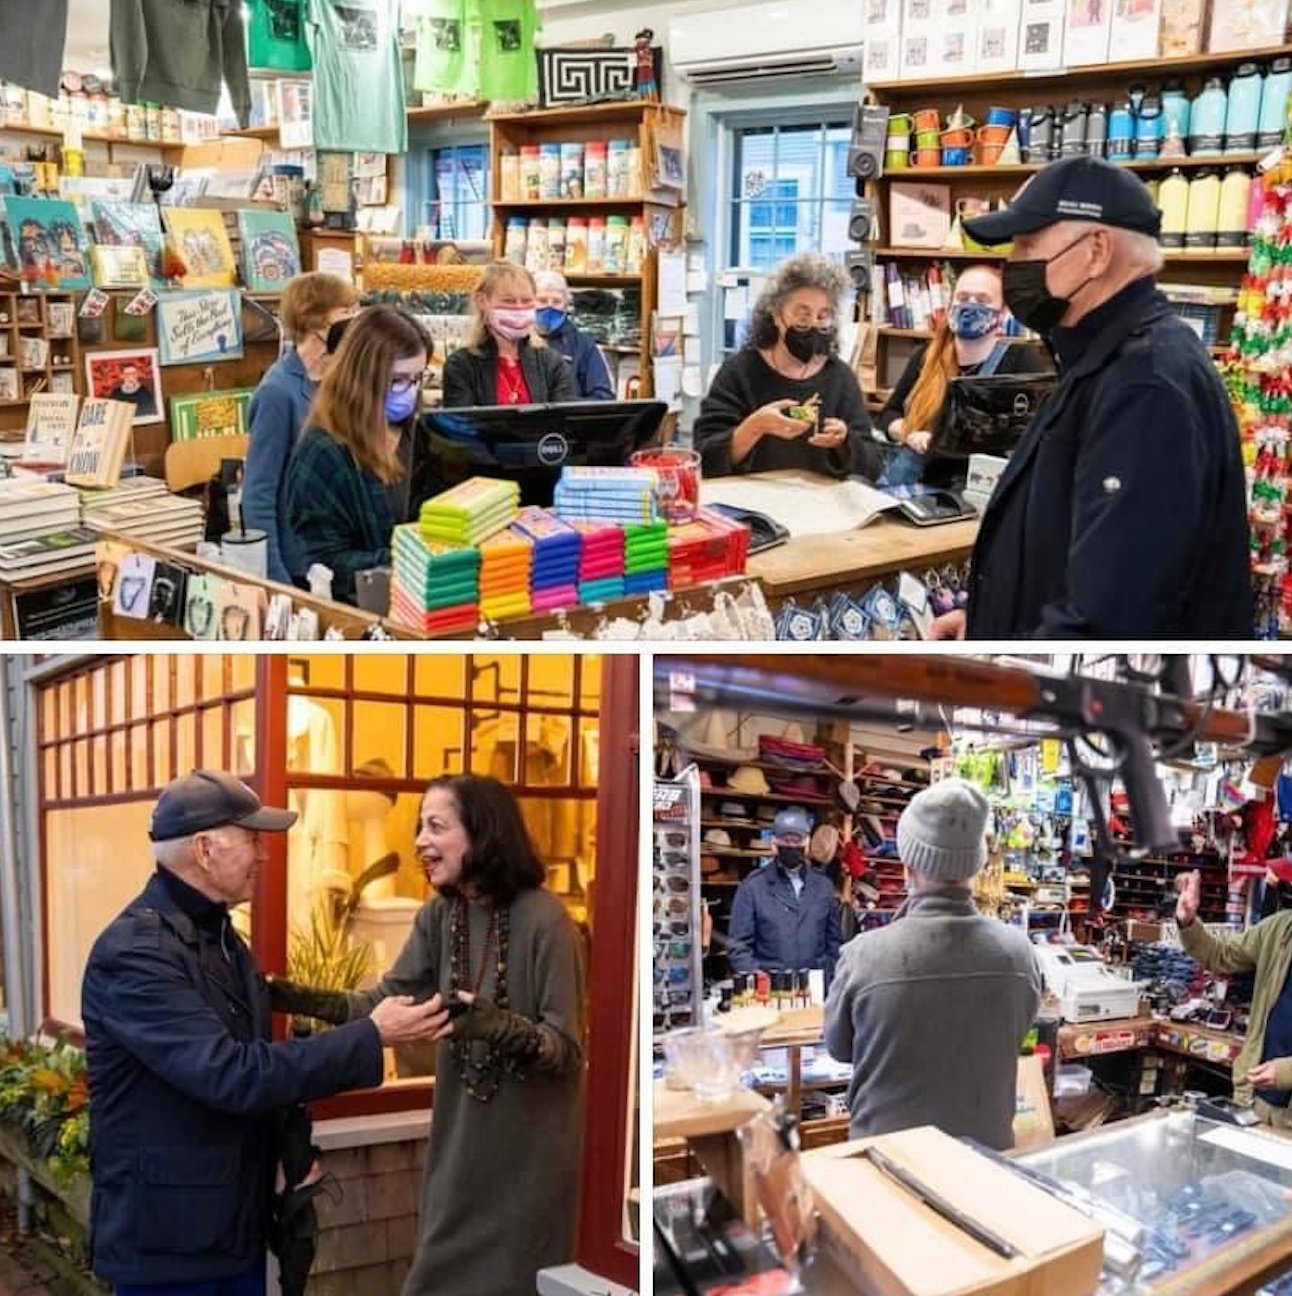 These pictures were posted on the president's official social media pages Saturday to promote shopping locally for the holidays.